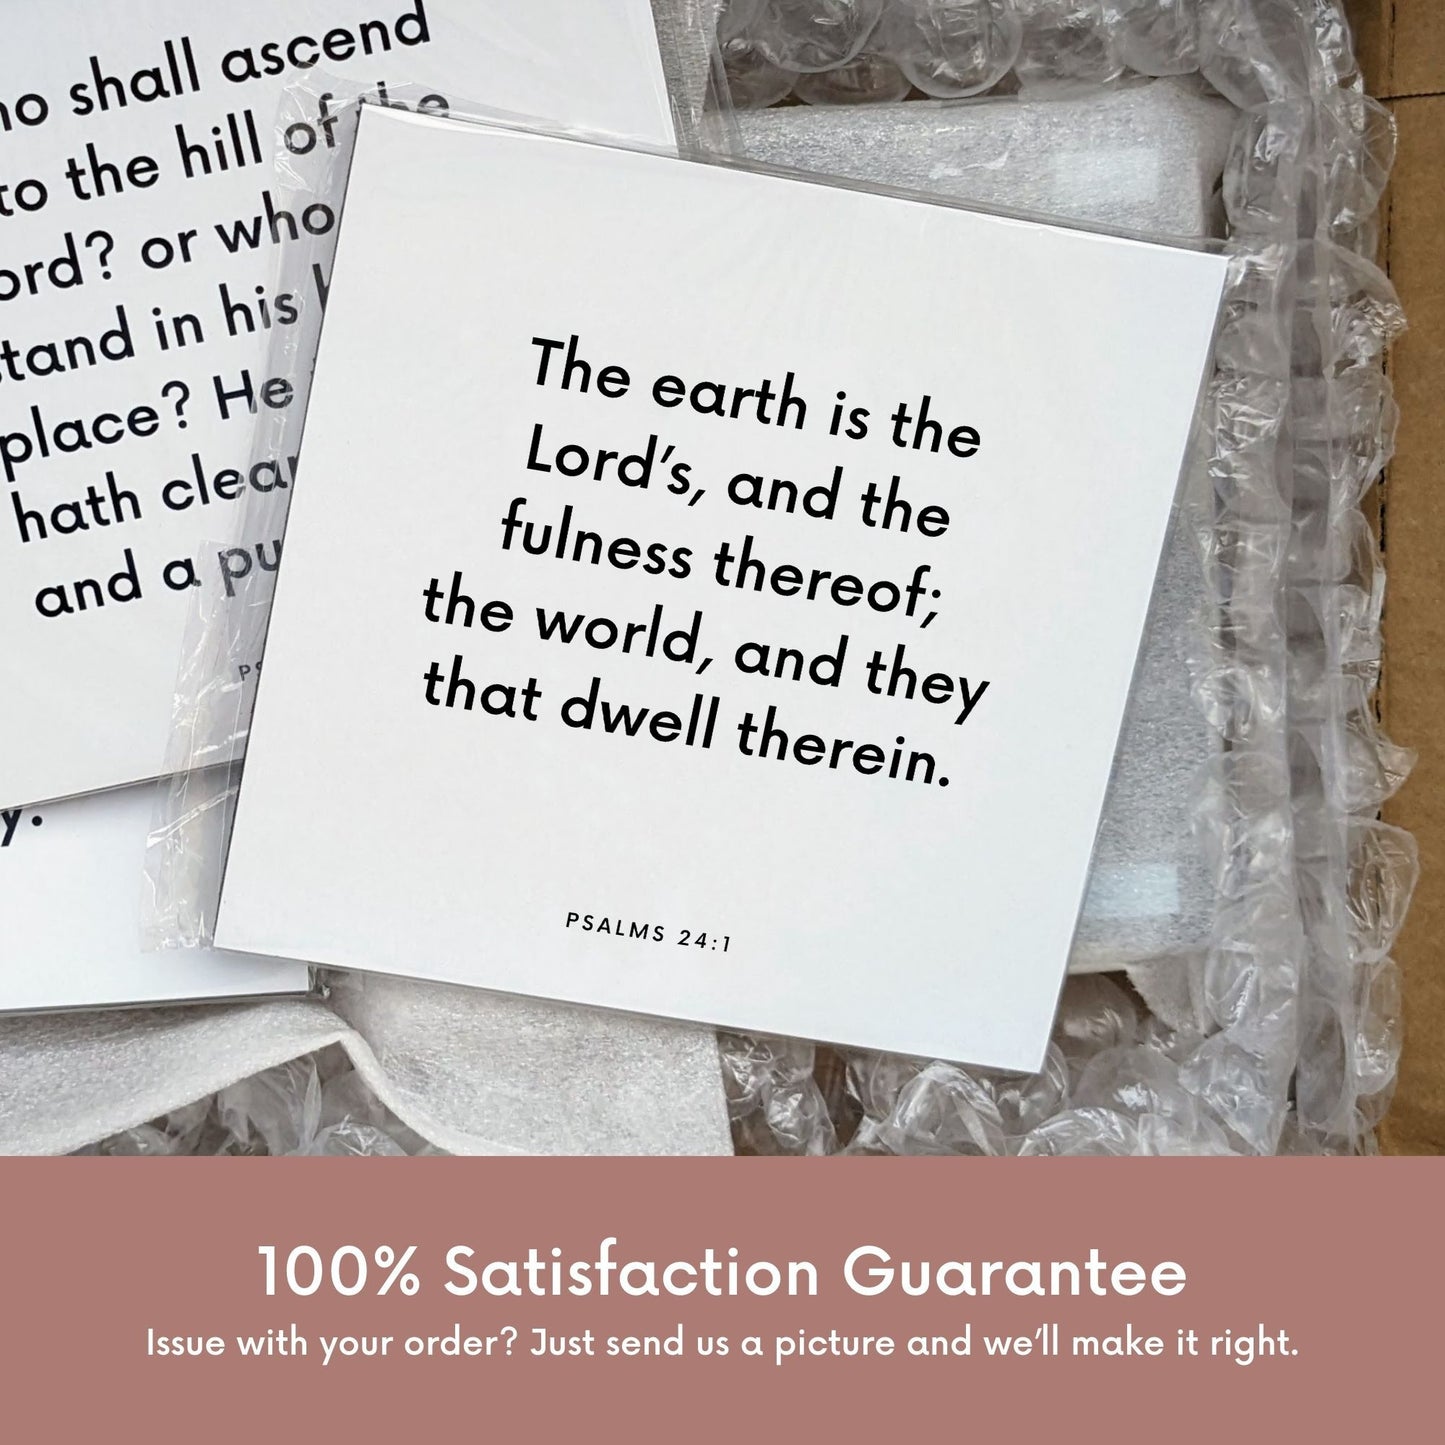 Shipping materials for scripture tile of Psalms 24:1 - "The earth is the Lord’s, and the fulness thereof"